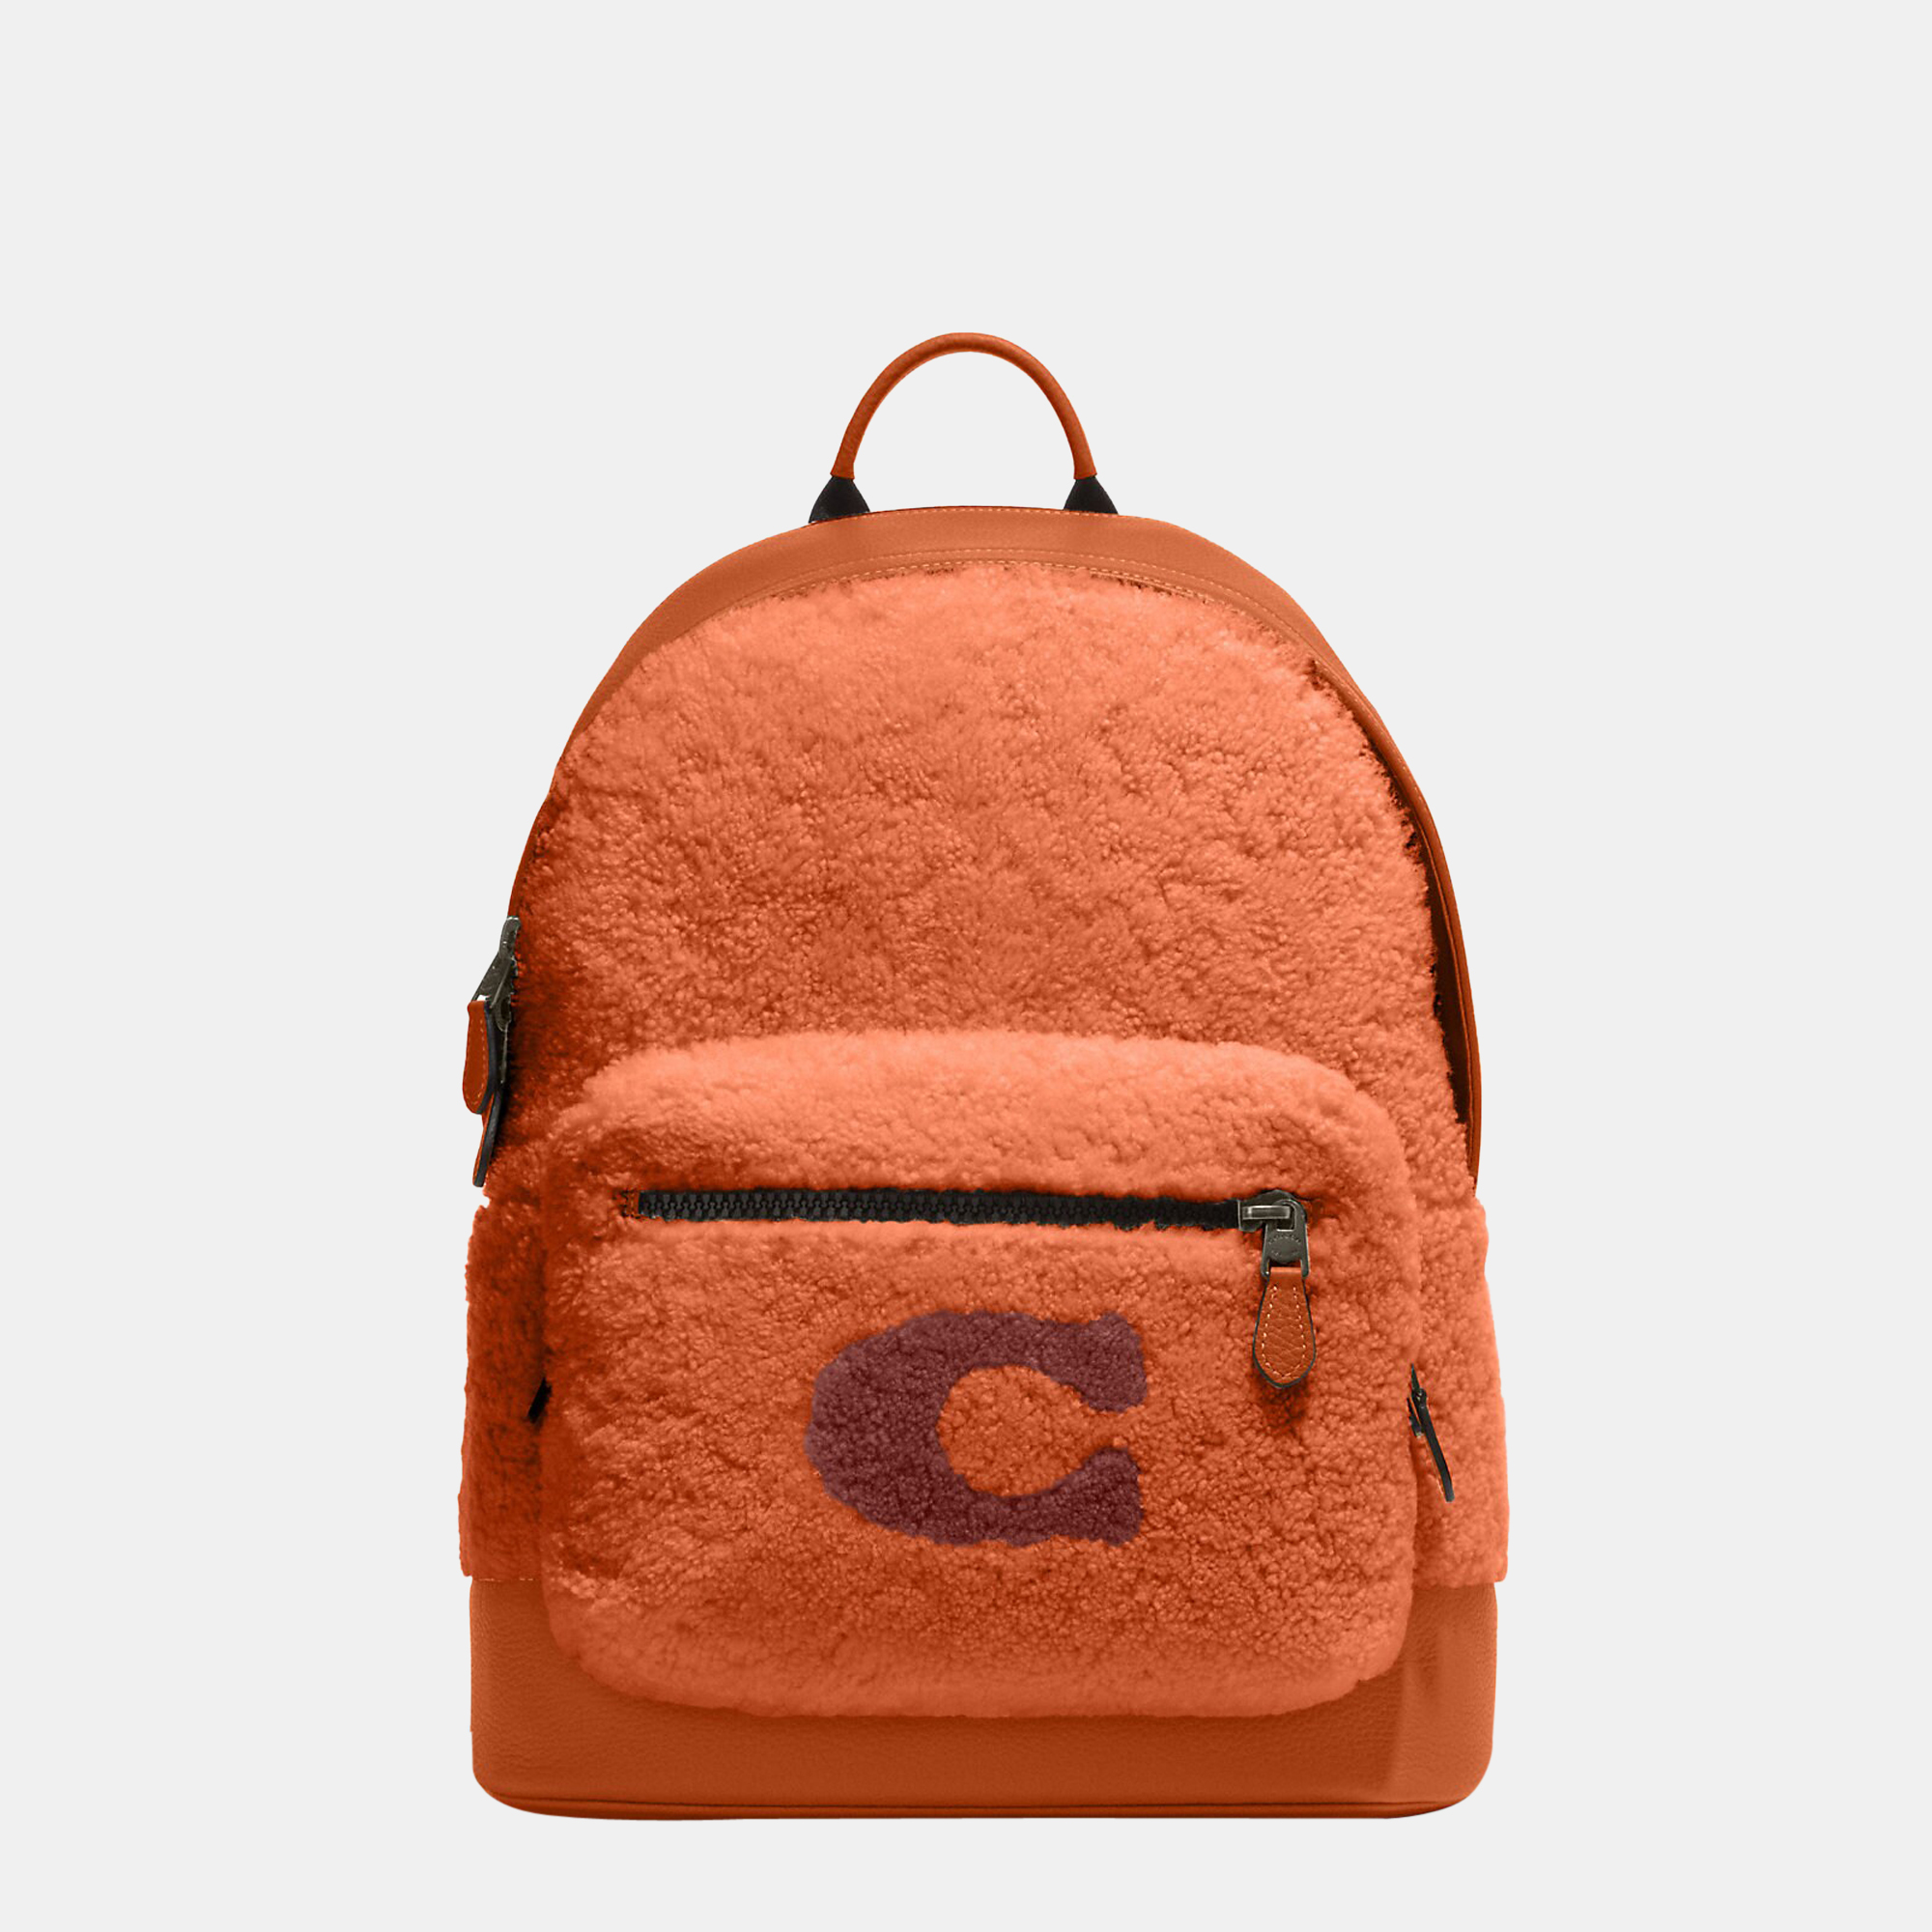 Coach Brown - Leather & Shearling - Backpack